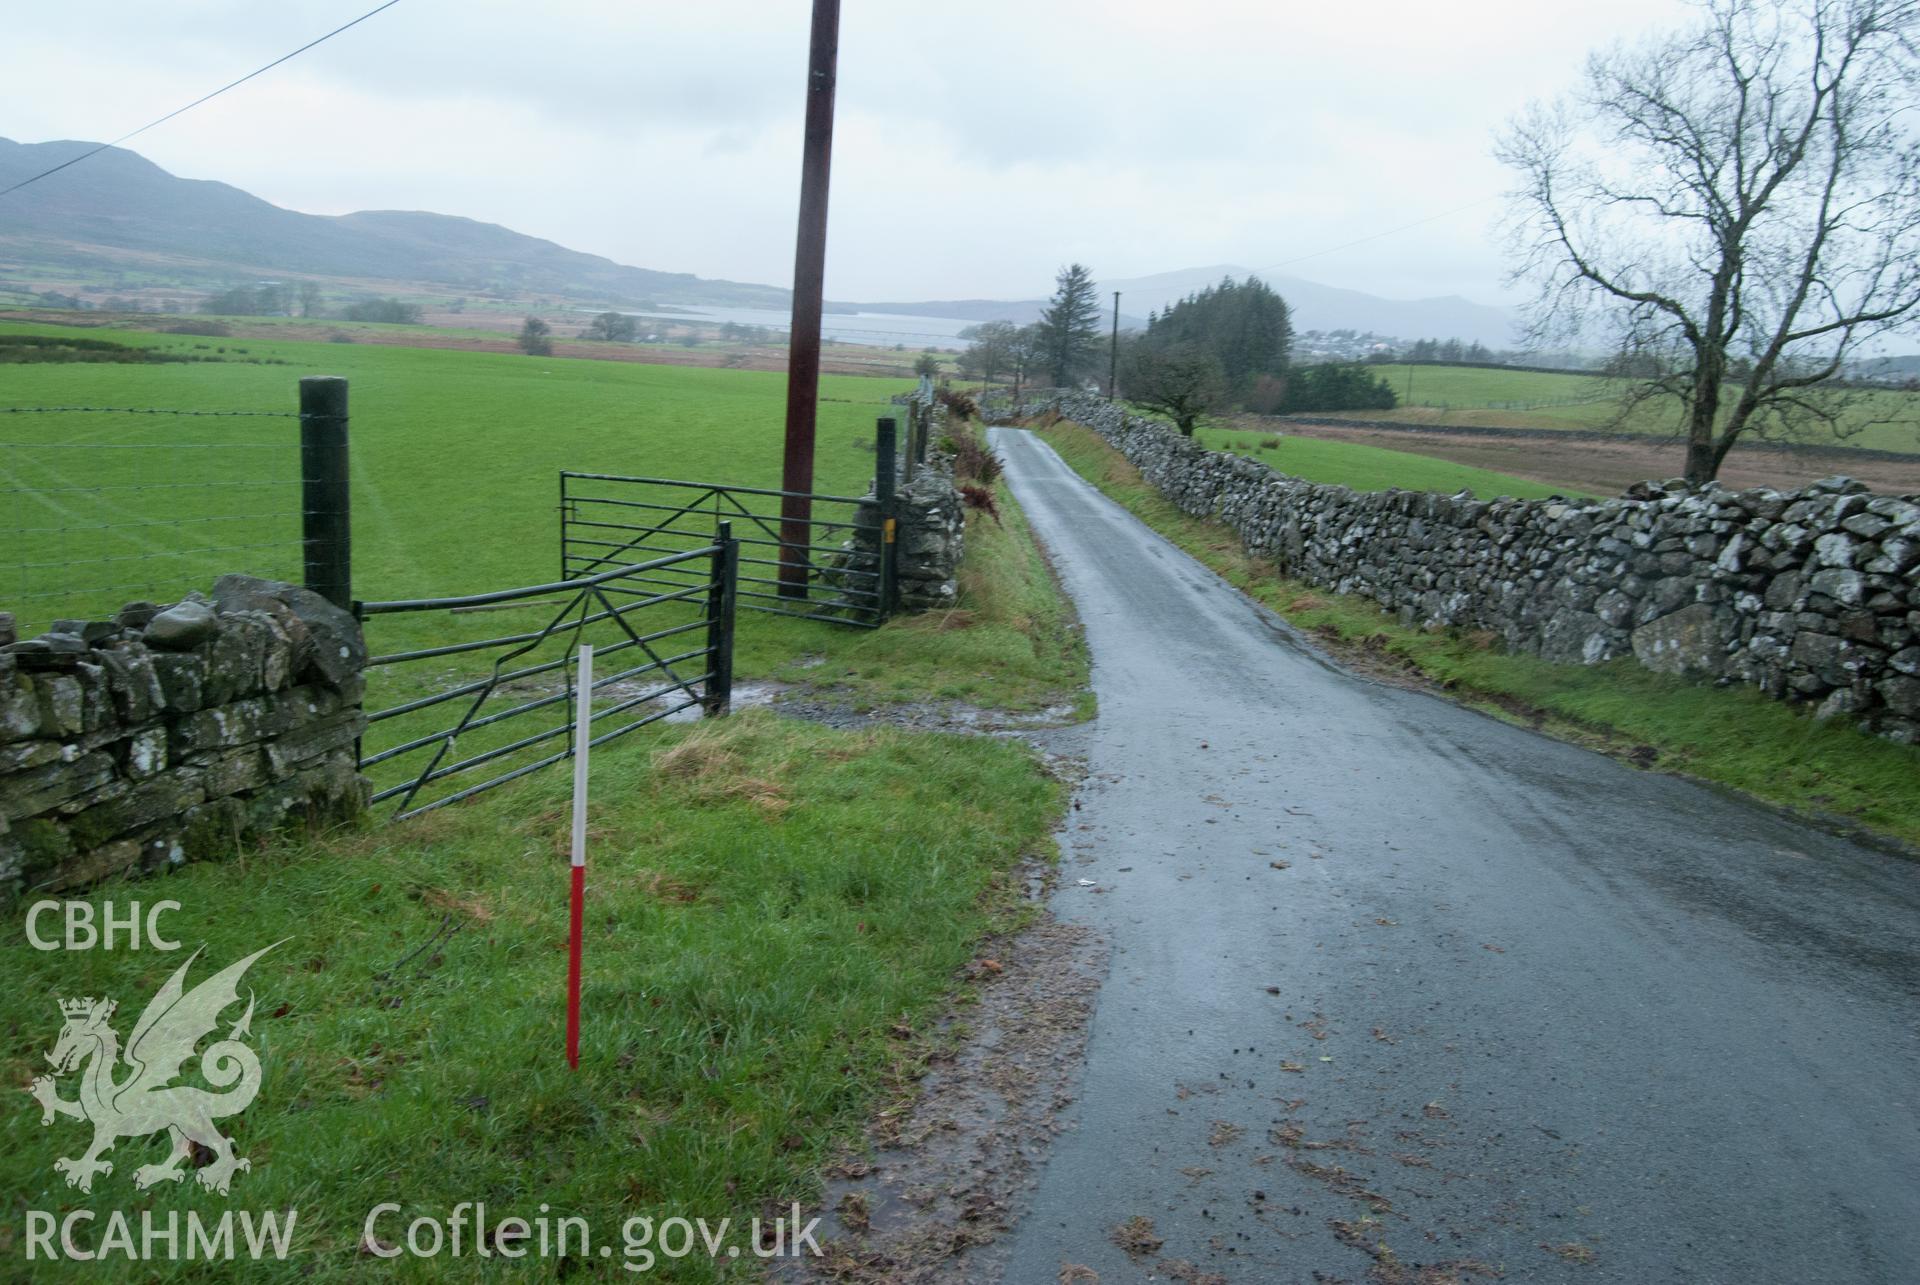 View from south-east, showing view along road opposite entrance to Bryn Llefrith farmhouse